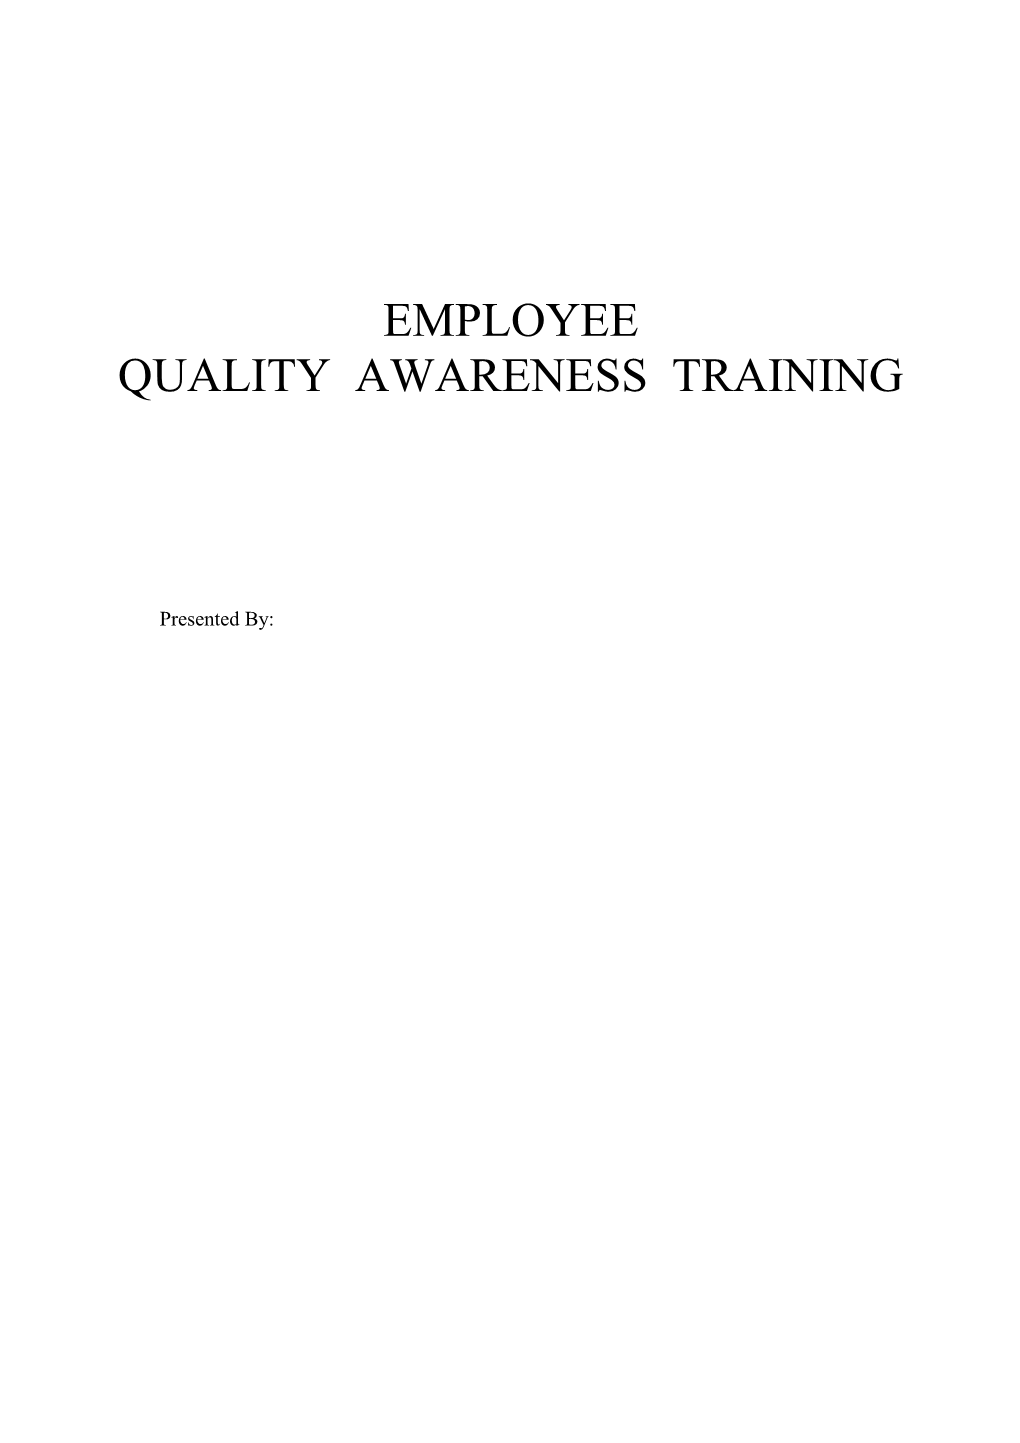 EMPLOYEE QUALITY AWARENESS Page 1 of 11